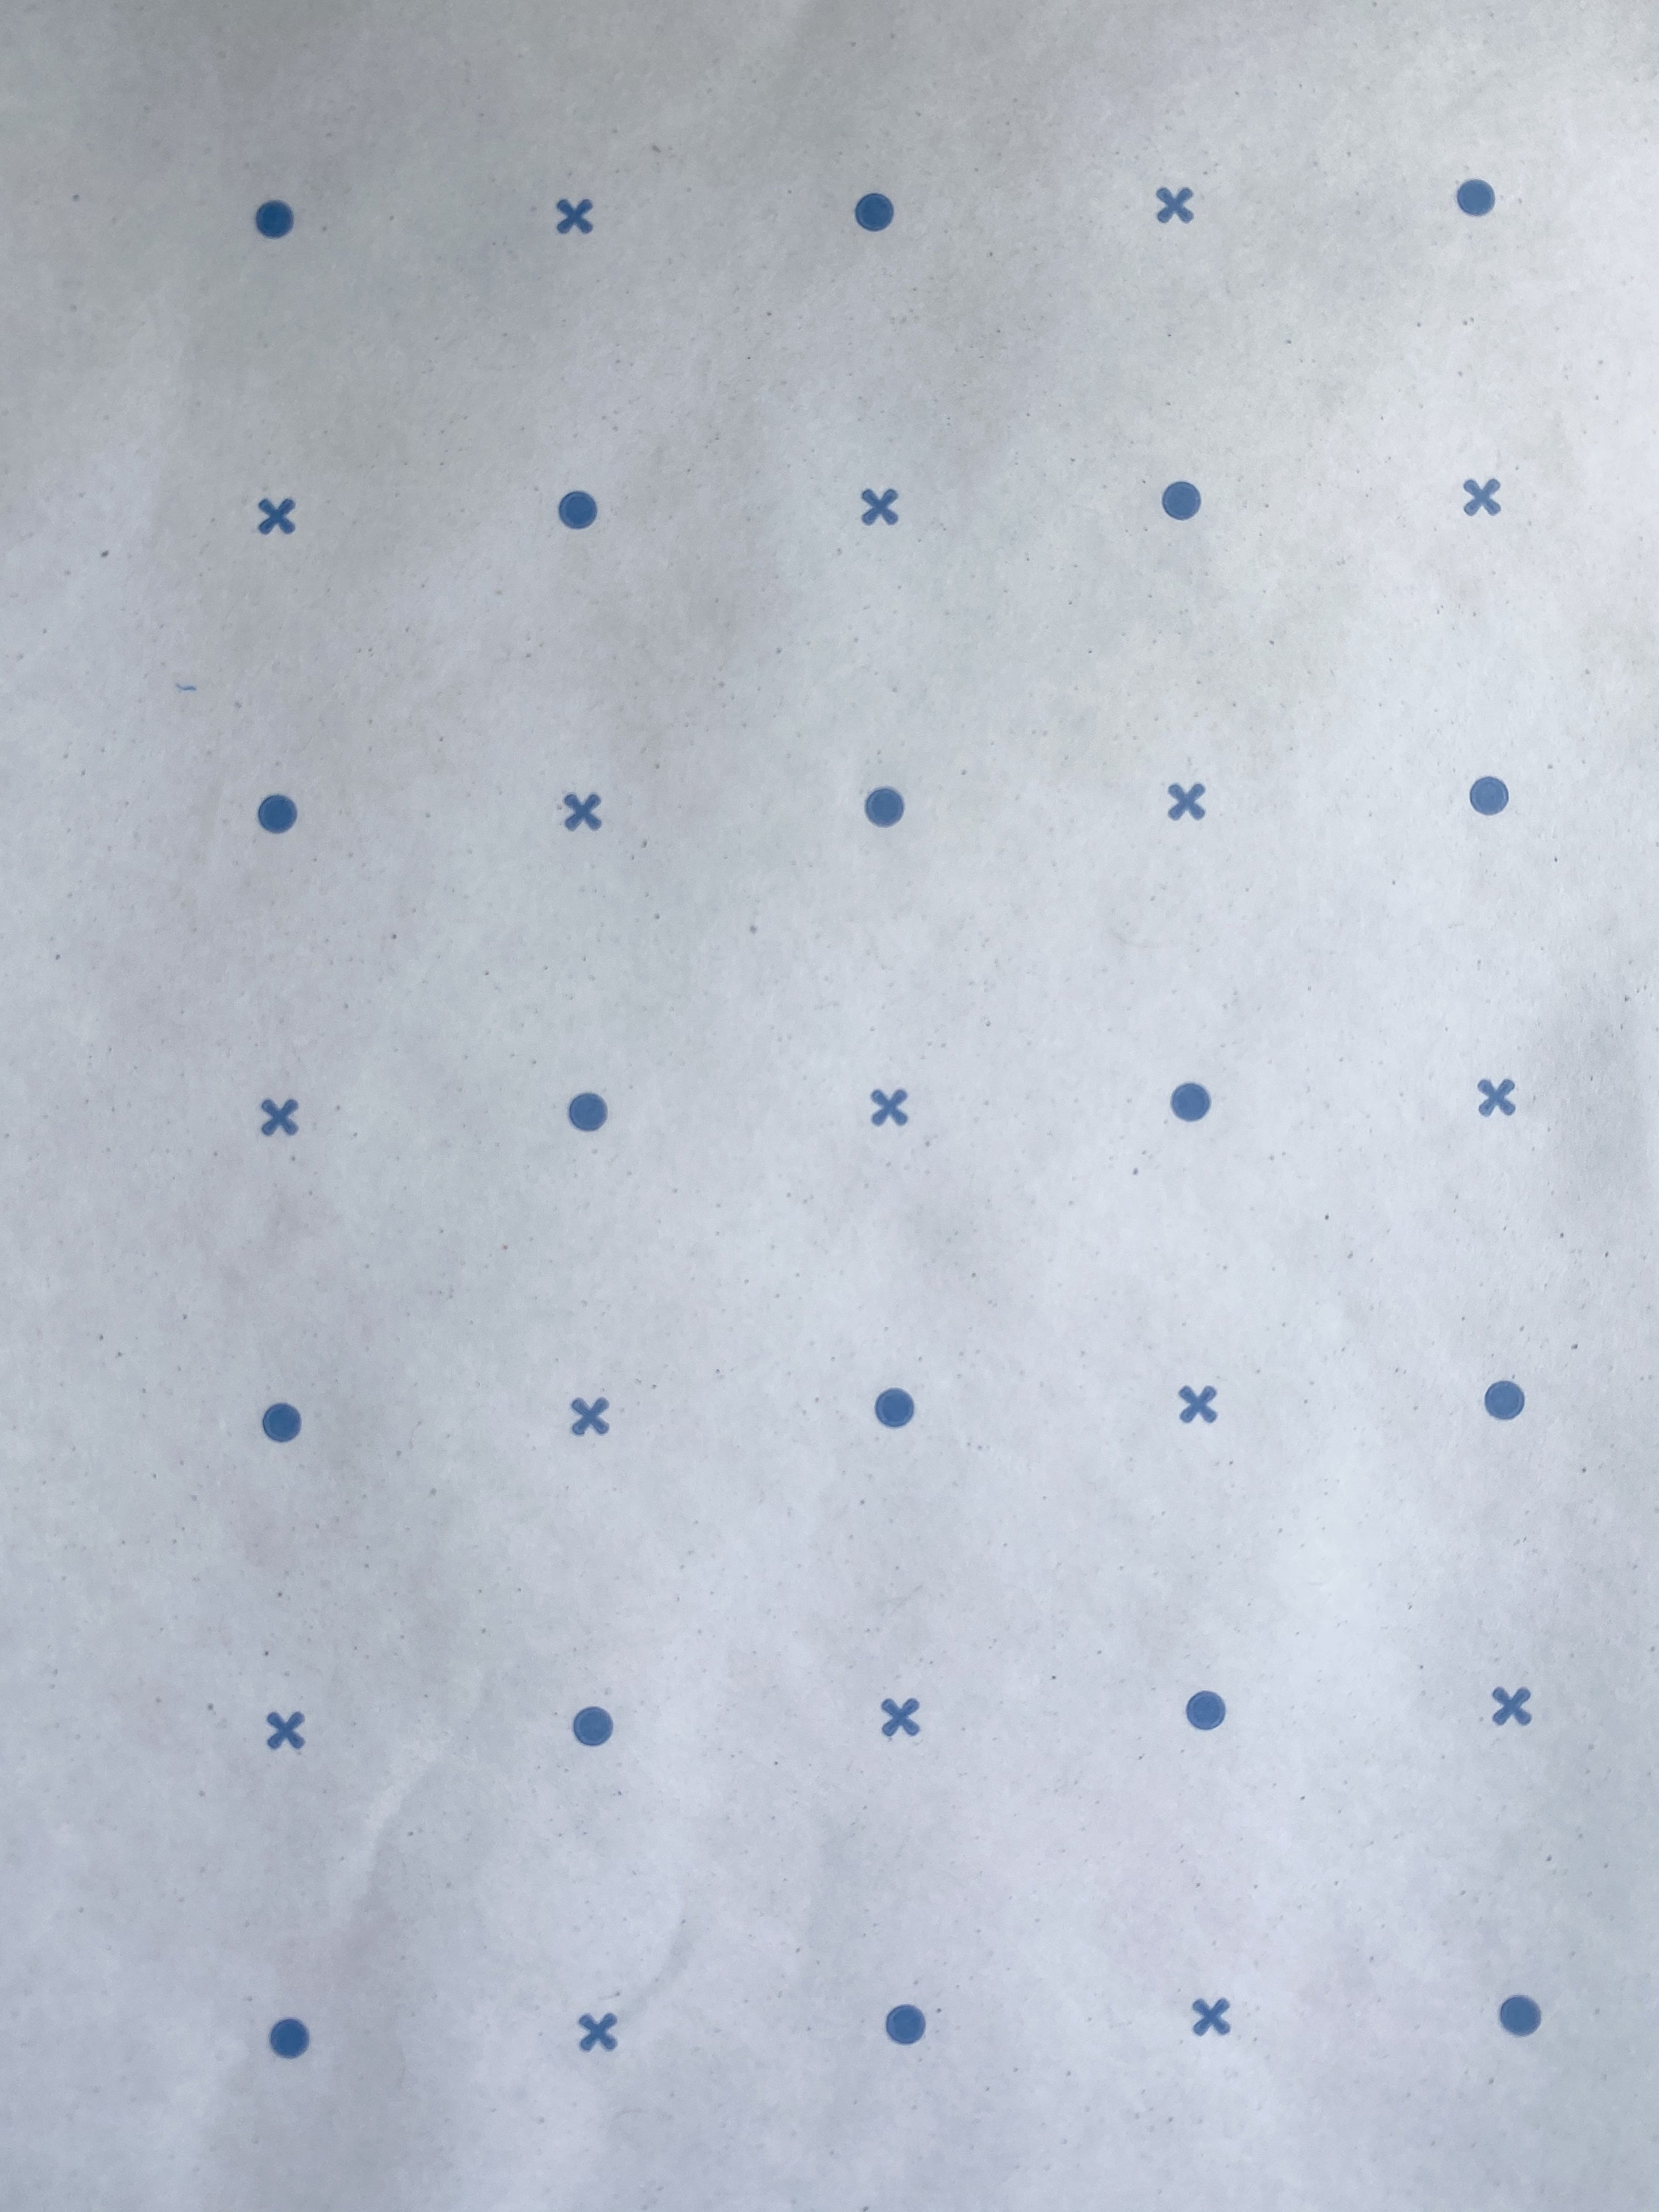 91cm / 122cm Dot and Cross Pattern Cutting Paper 20mm Spacing